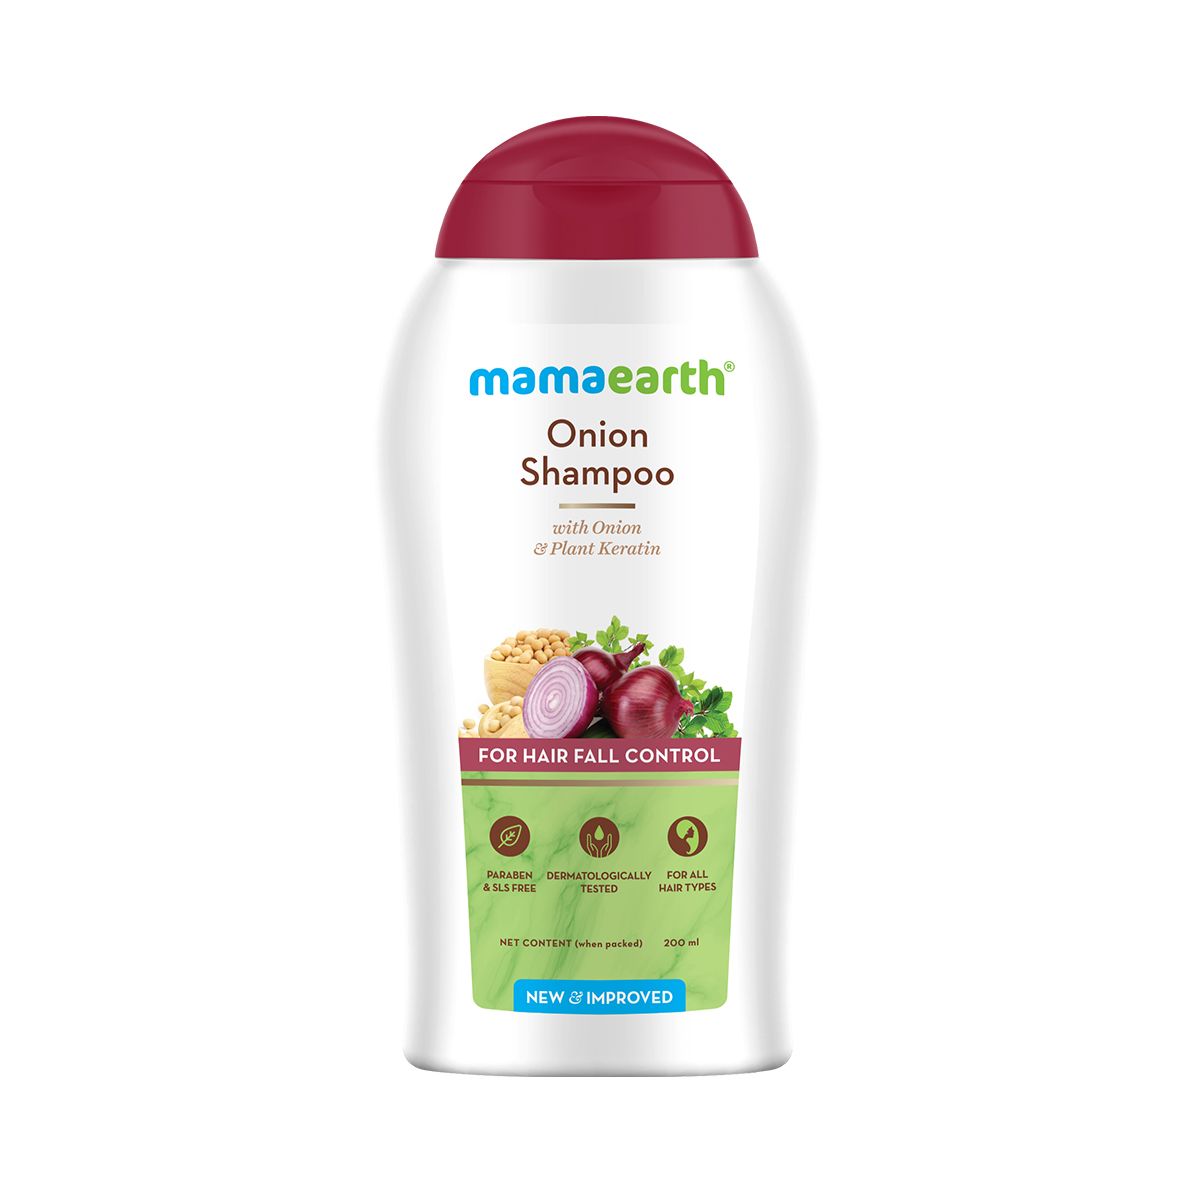 Mamaearth Onion Shampoo Better Than Any Others